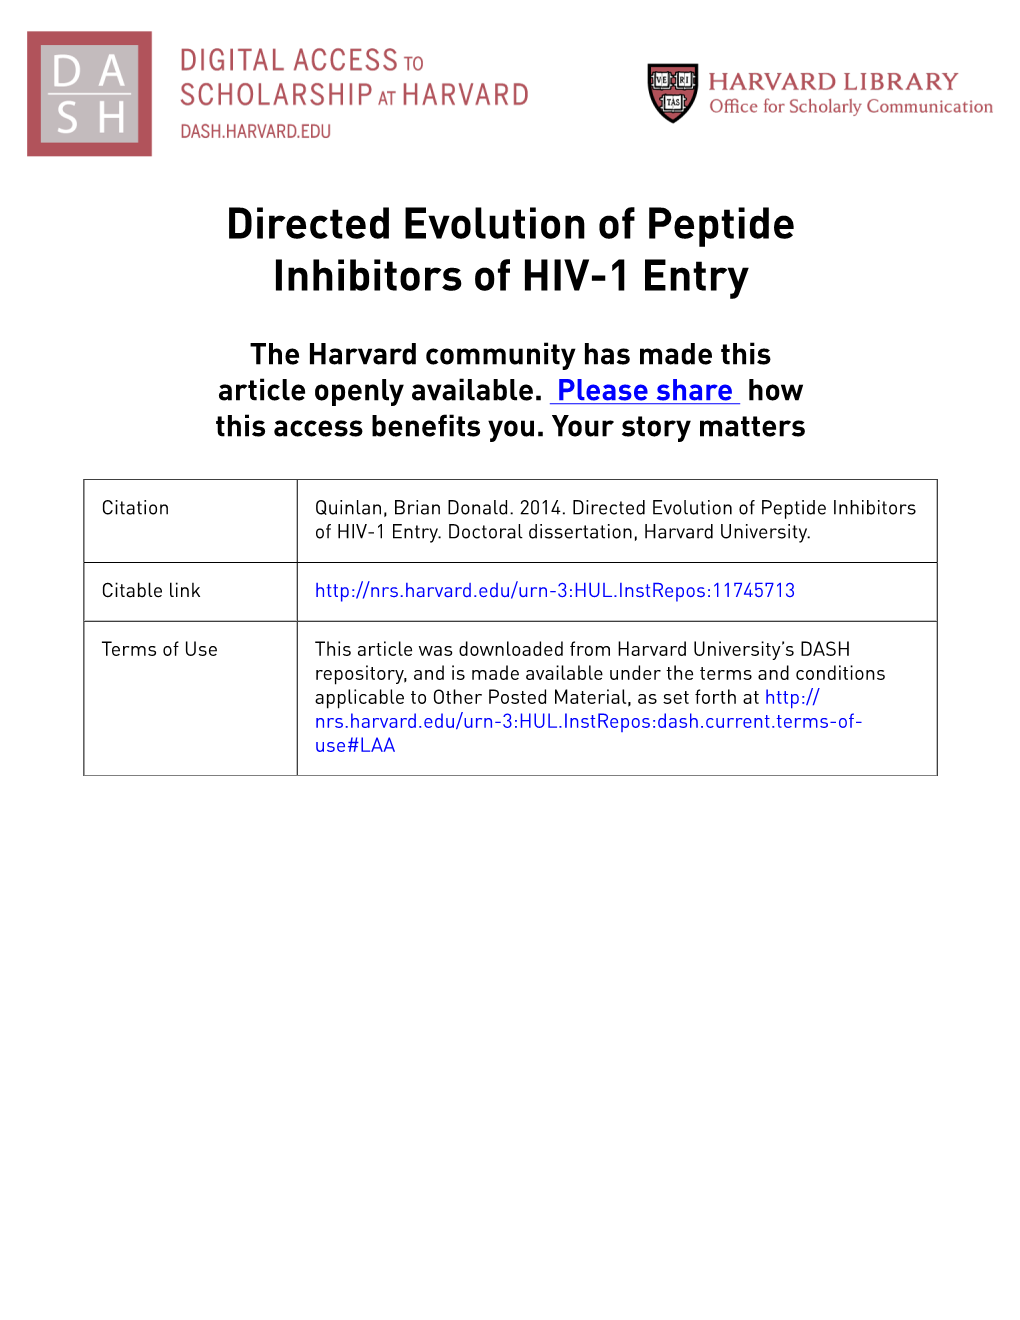 Directed Evolution of Peptide Inhibitors of HIV-1 Entry